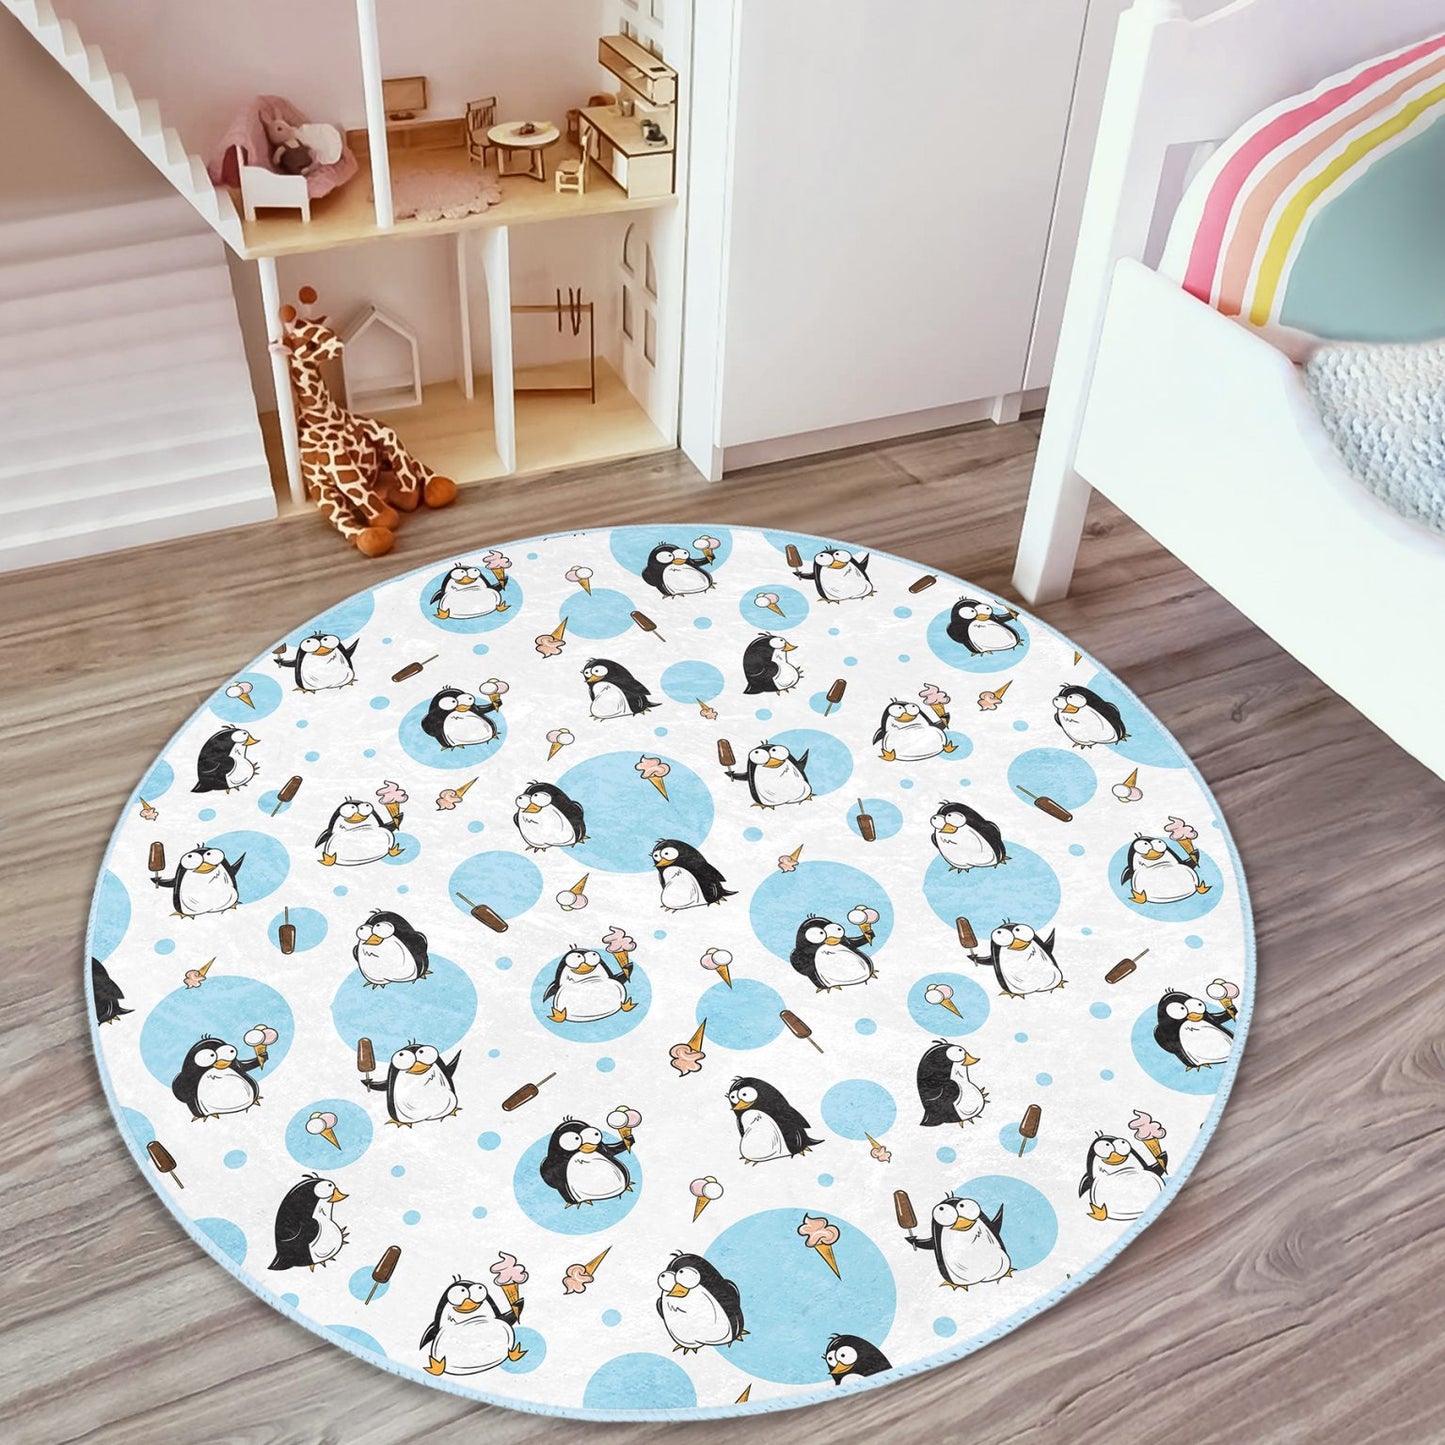 Kid-Friendly Rug with Playful Baby Penguins for Kids' Room